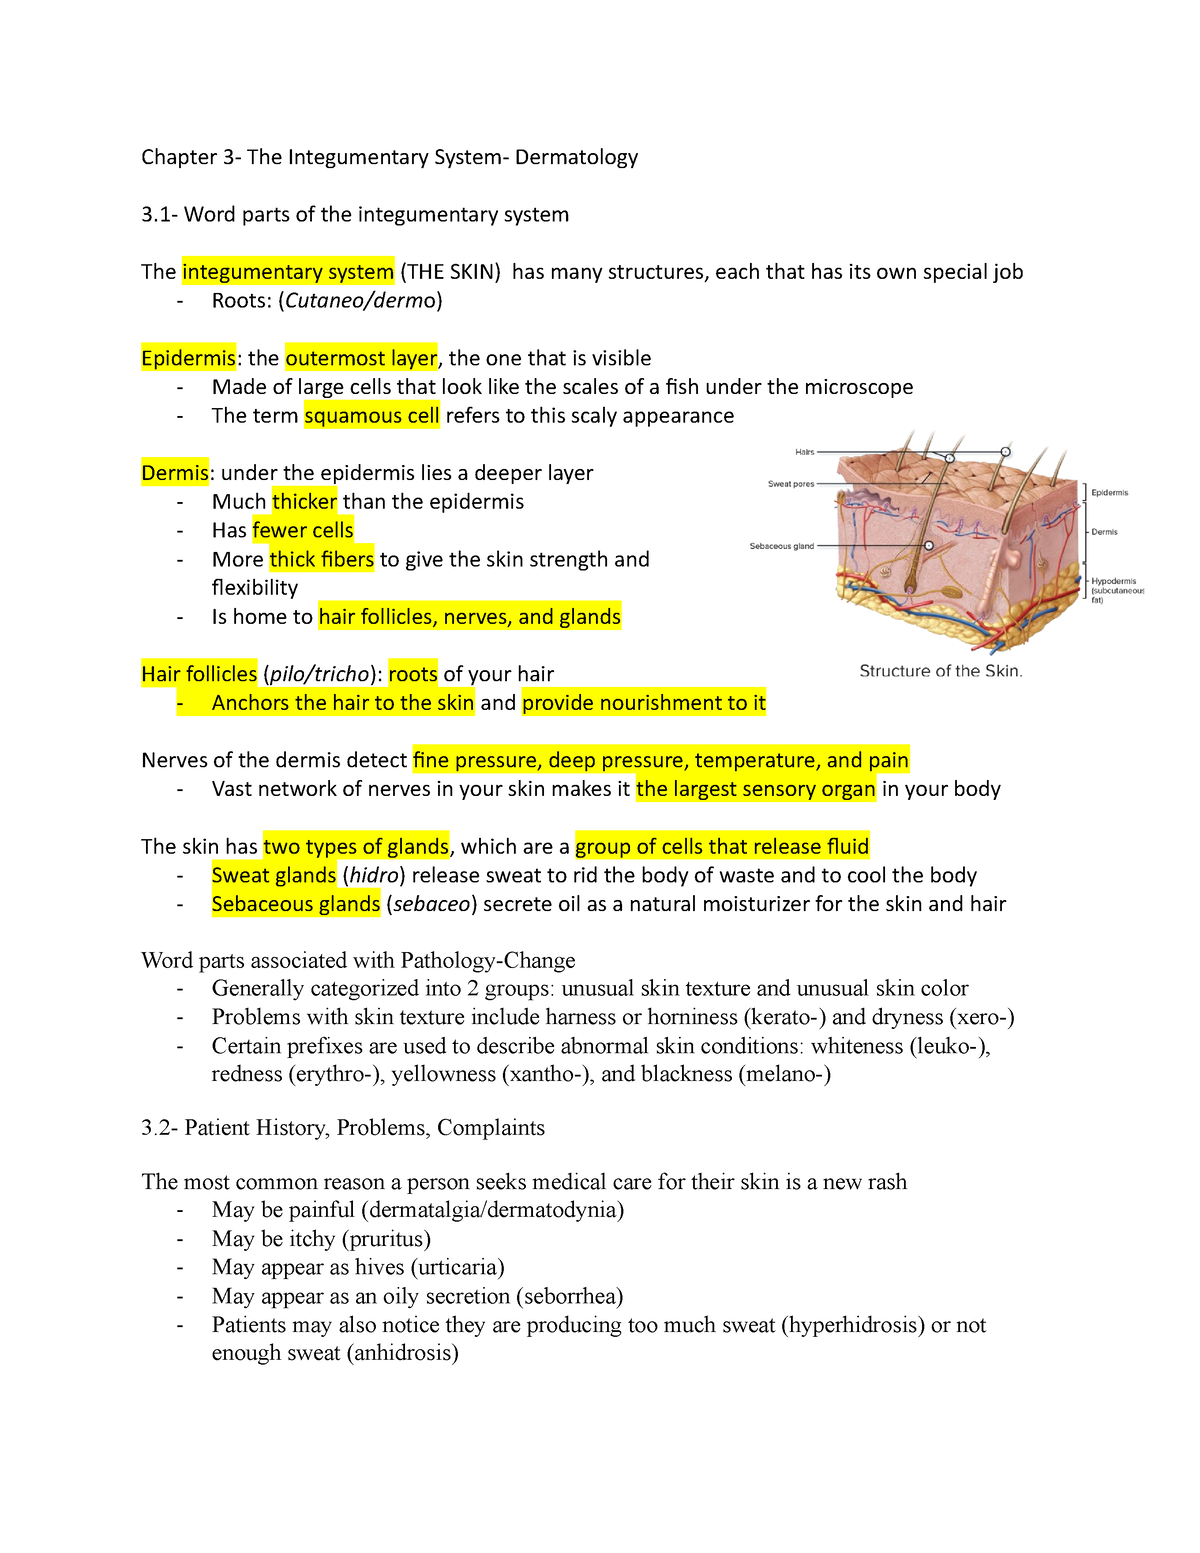 case study for chapter 3 medical terminology